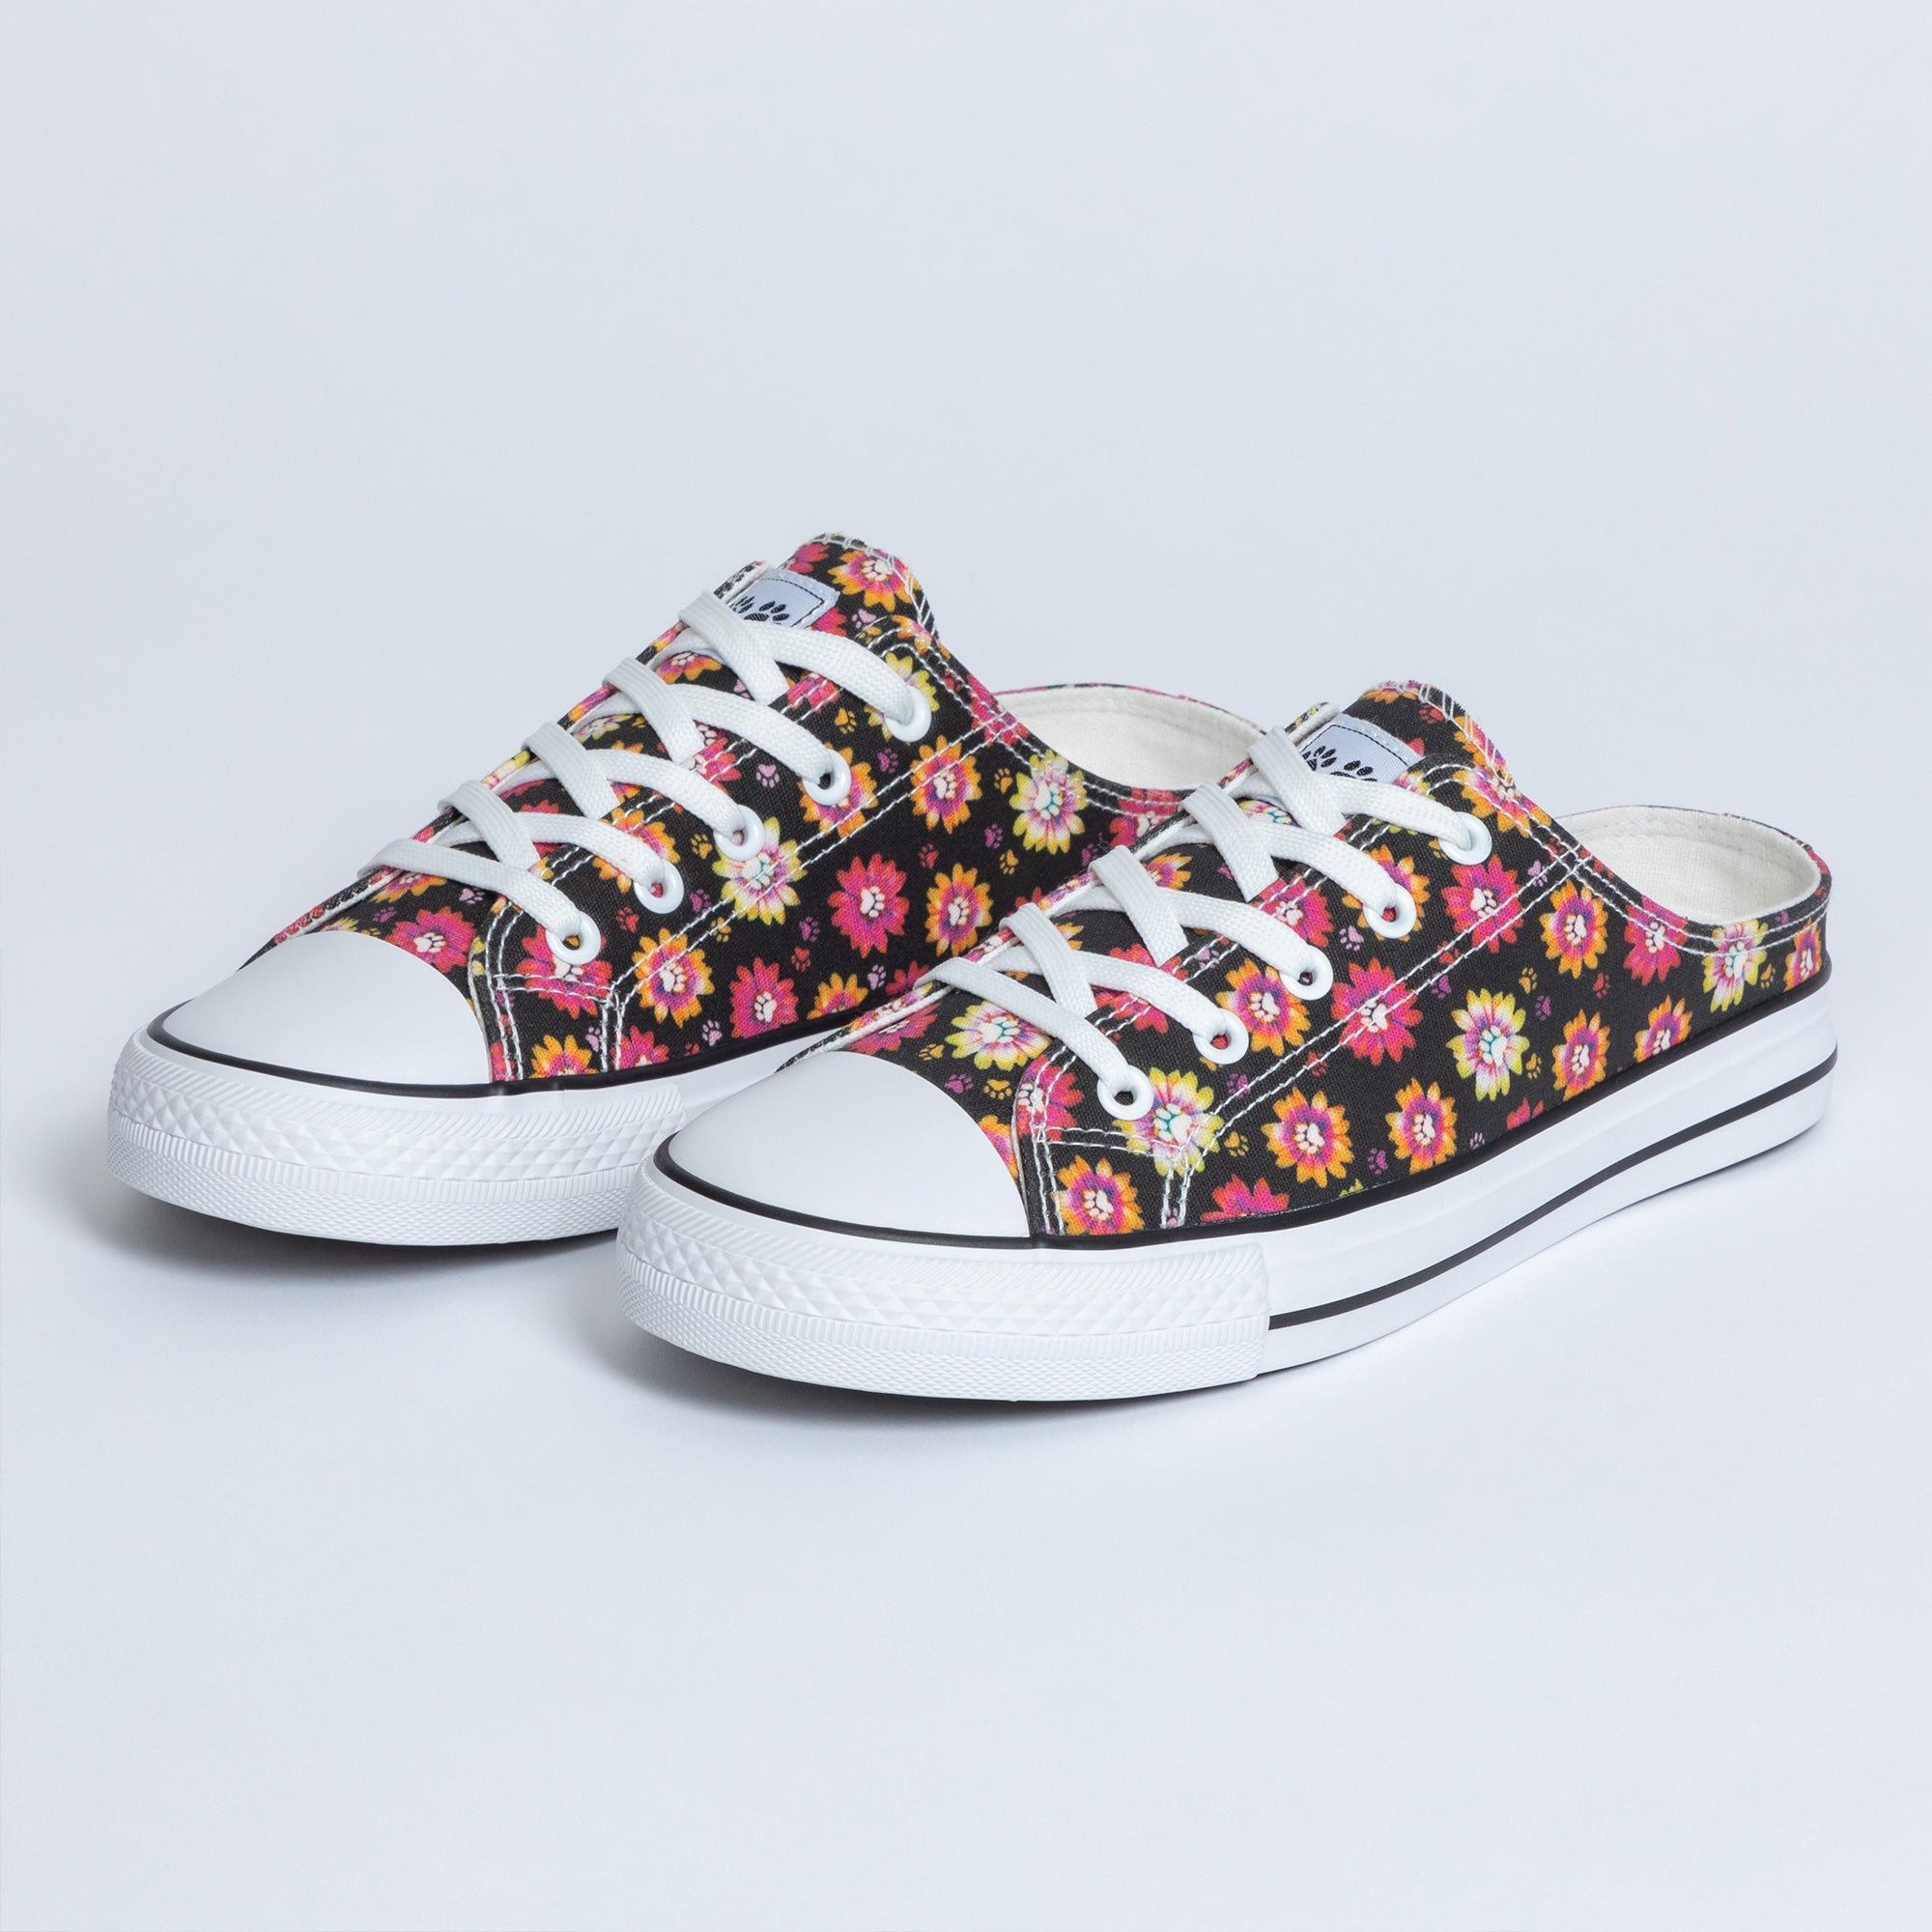 Paw Print Canvas Slip-On Sneakers - Pretty Paw Daisies - 7